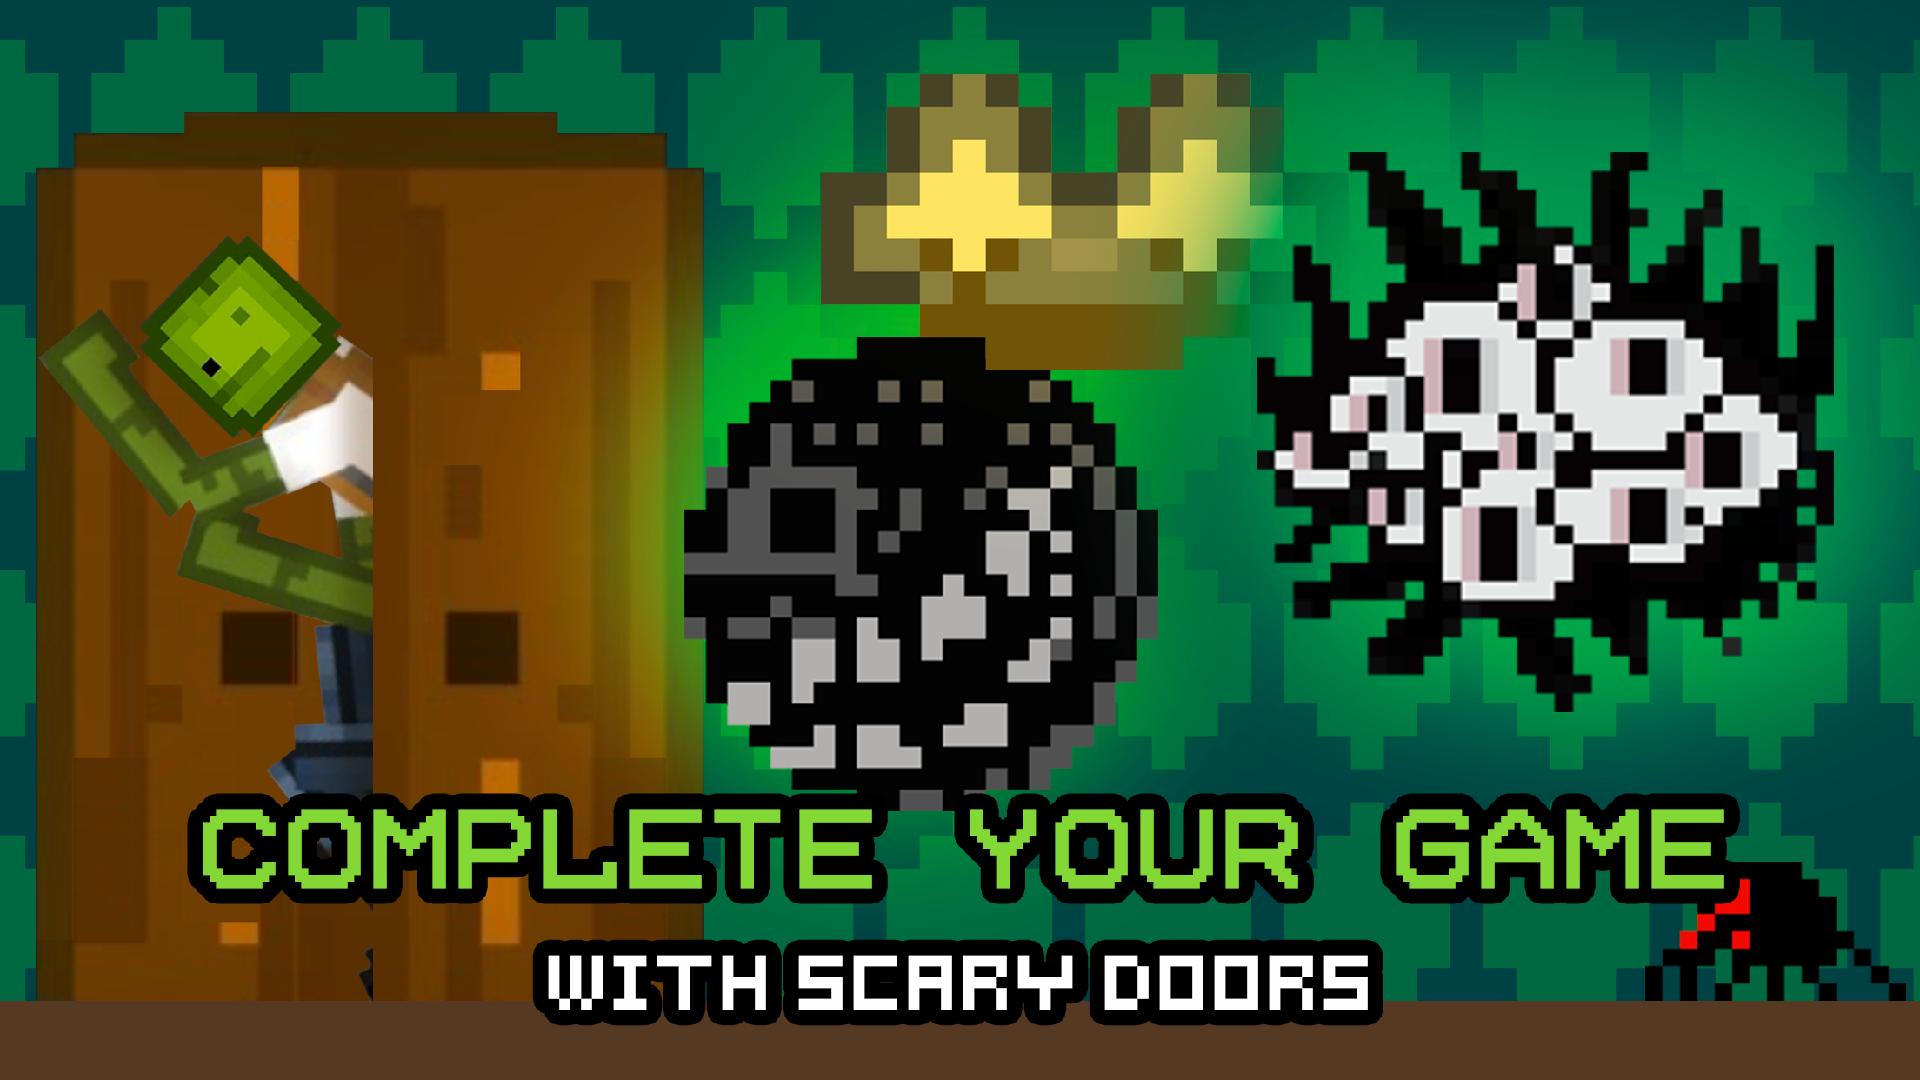 Doors mod for melon playground APK for Android Download